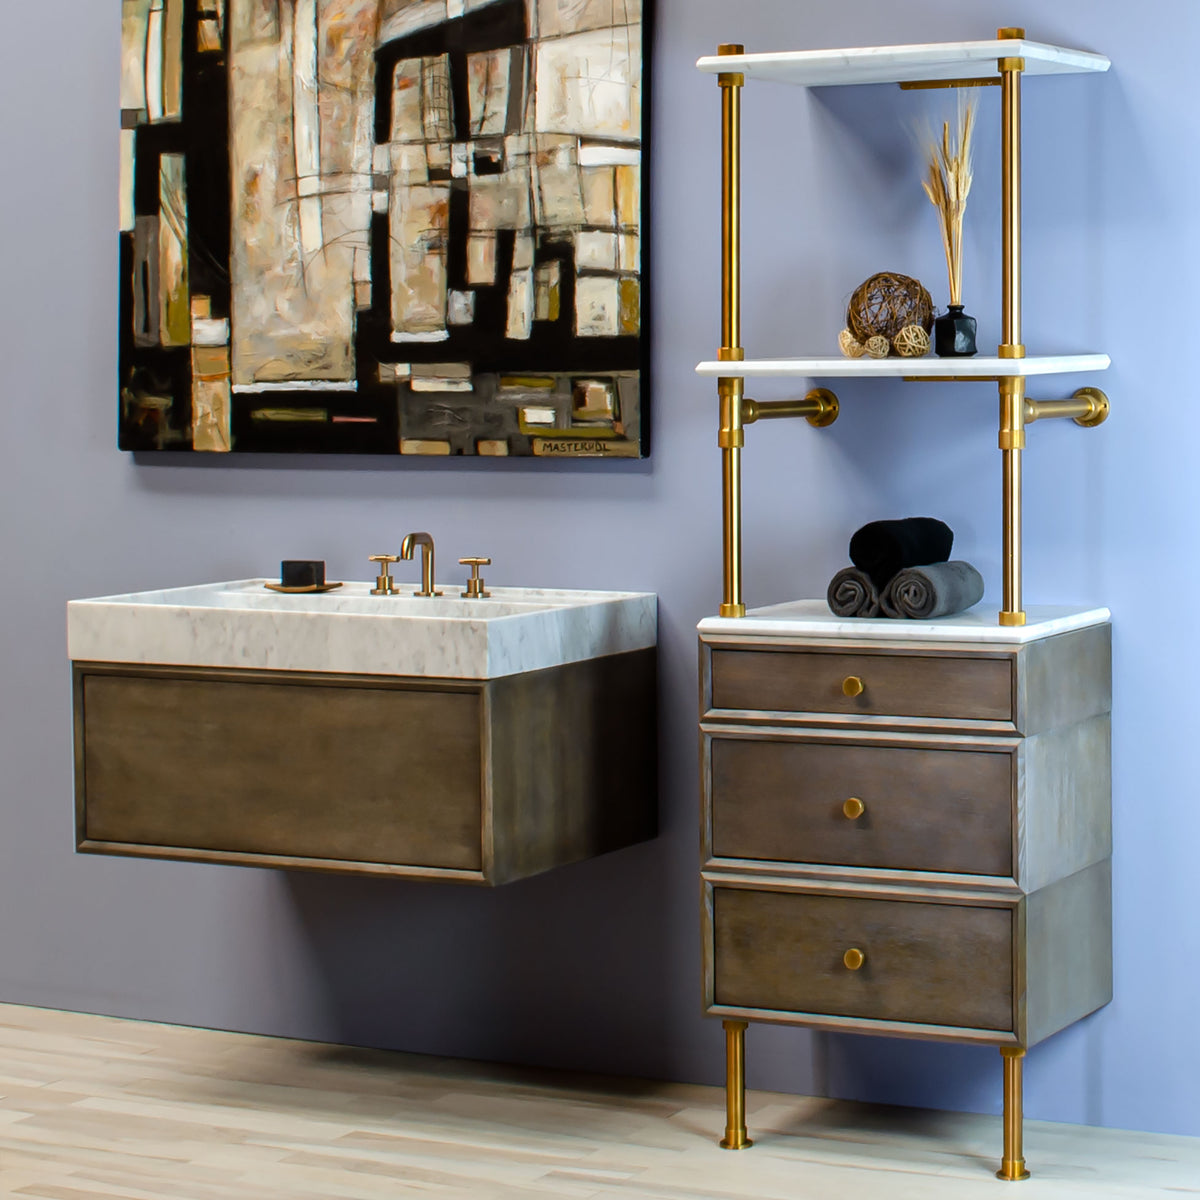 Ventus Bath Sink with Faucet Deck paired with Elemental Hanging Vanity image 2 of 3